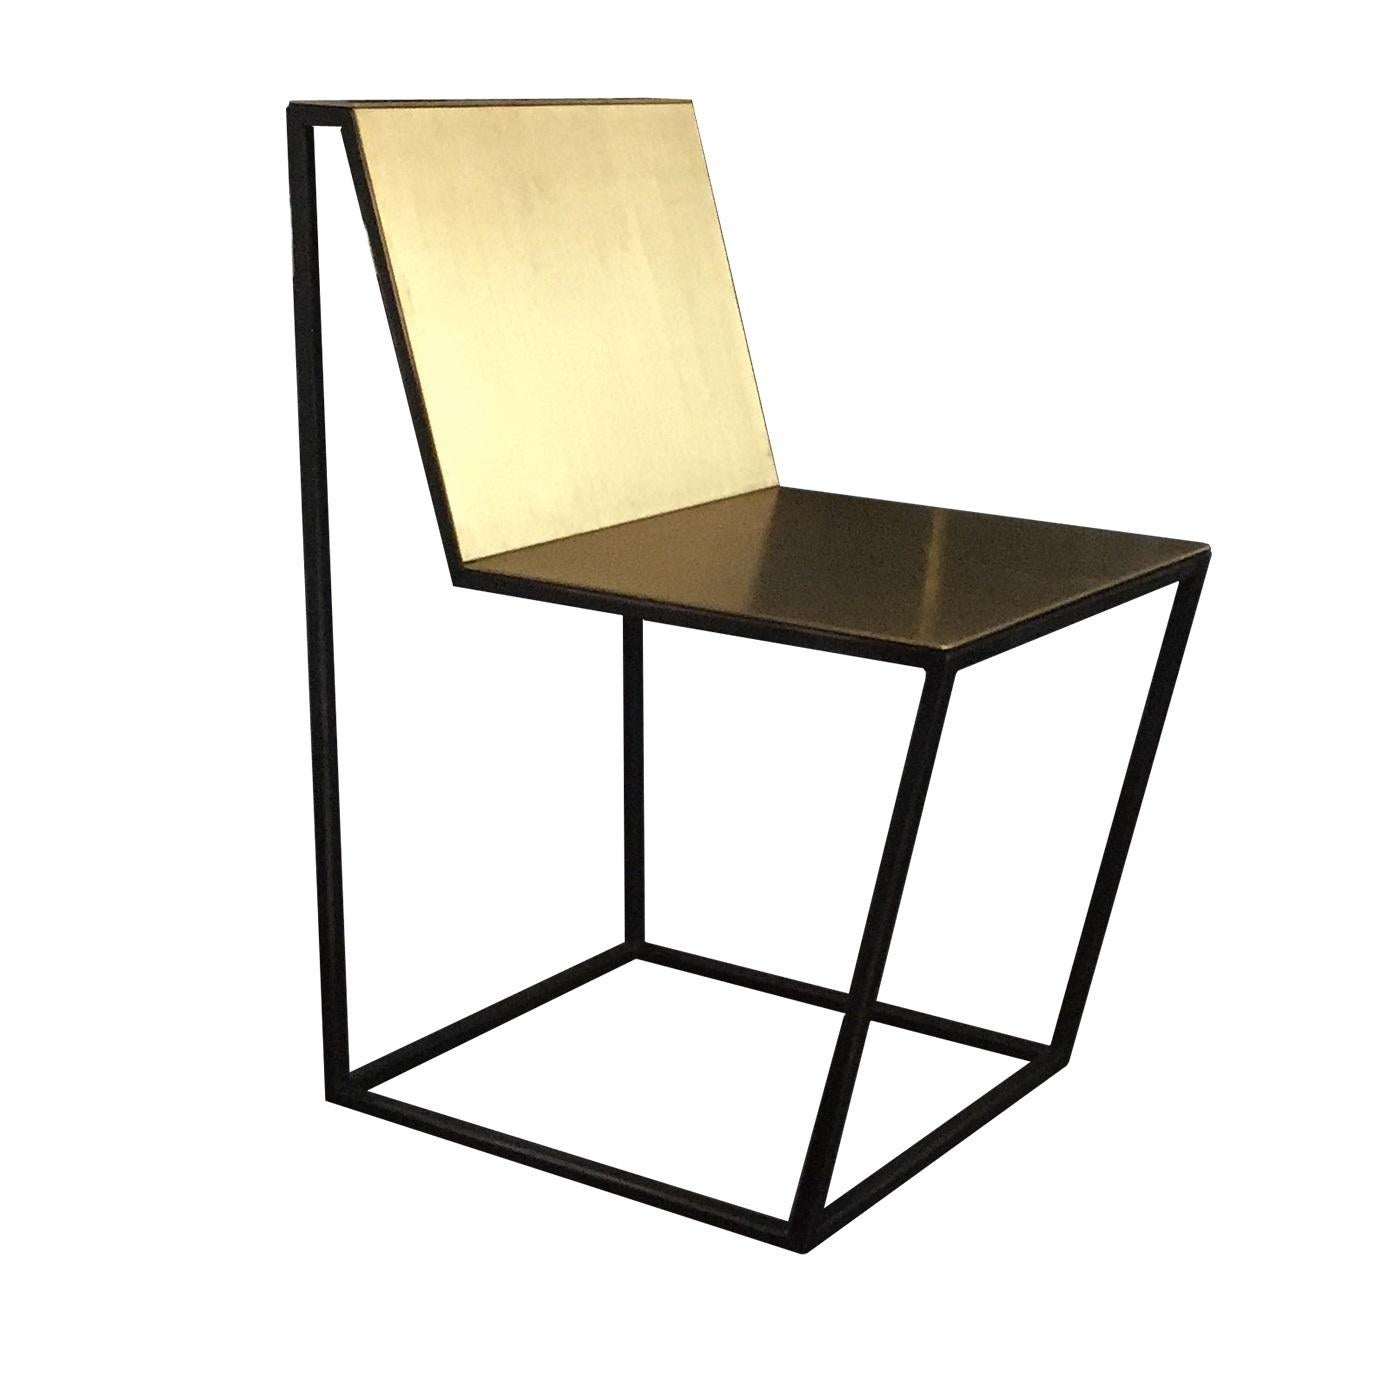 Modern Forma Frame Extra Large Chair